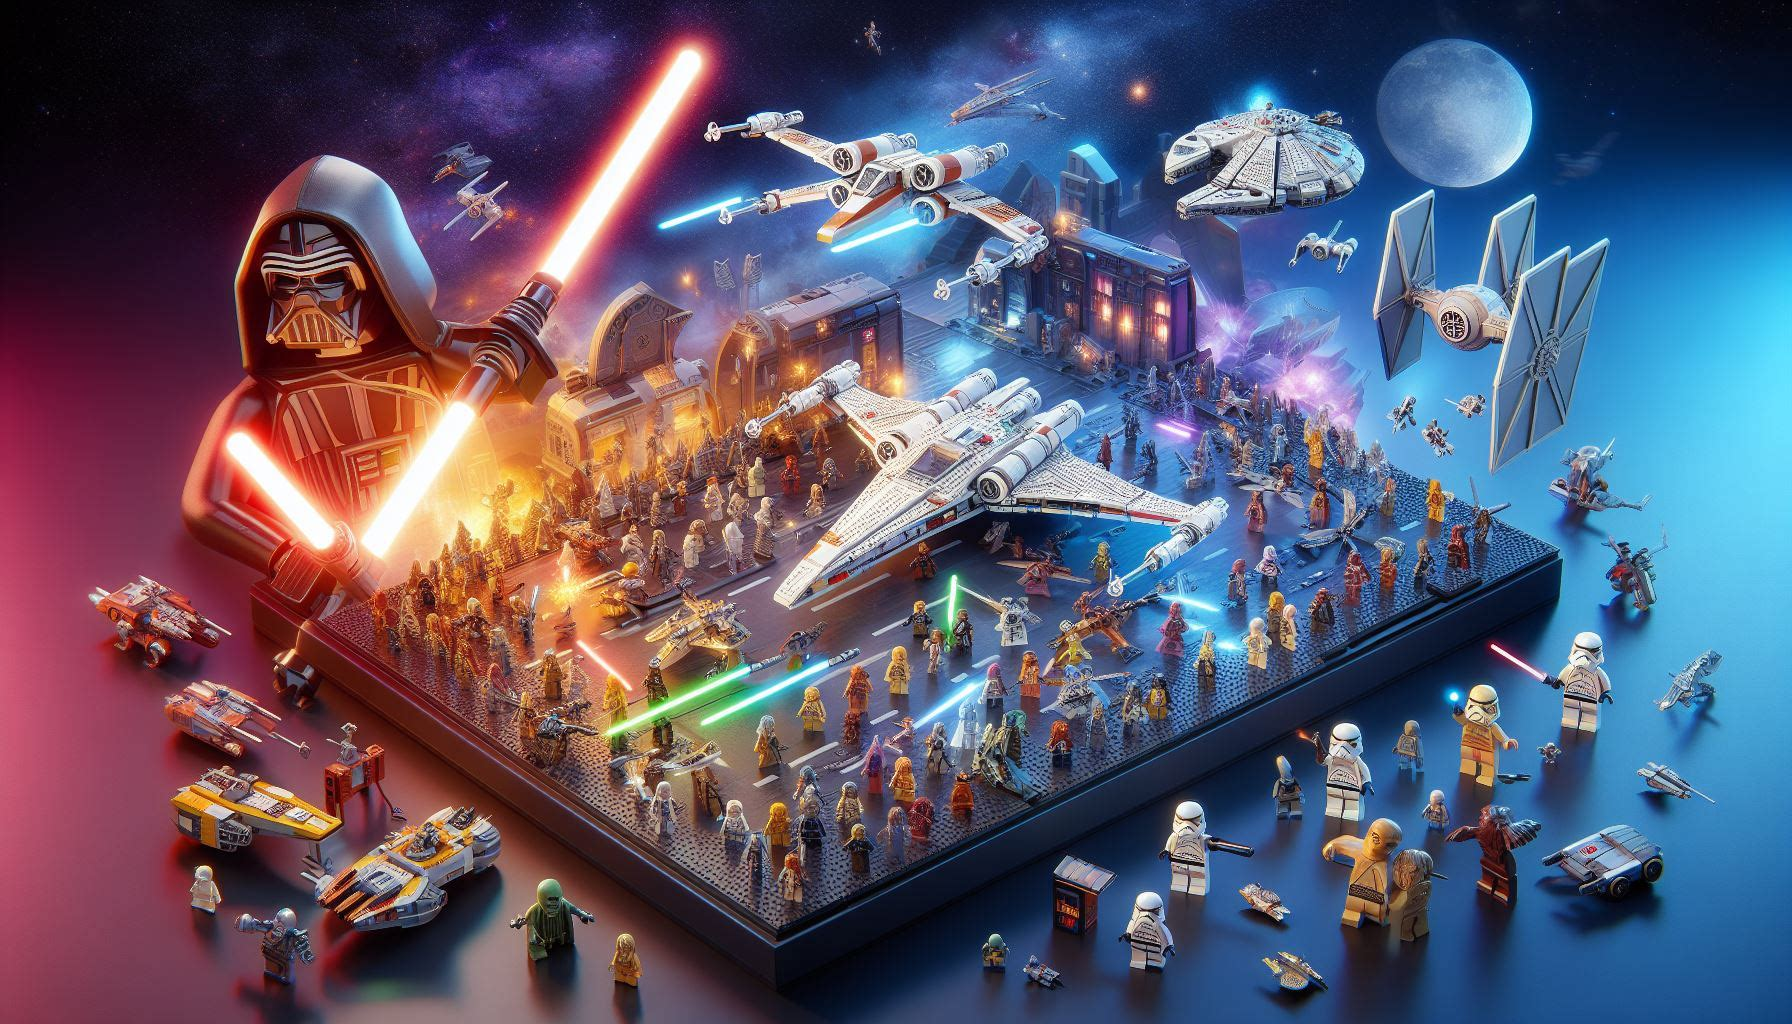 Star Wars LEGO Sets A Galaxy of Creativity and Adventure